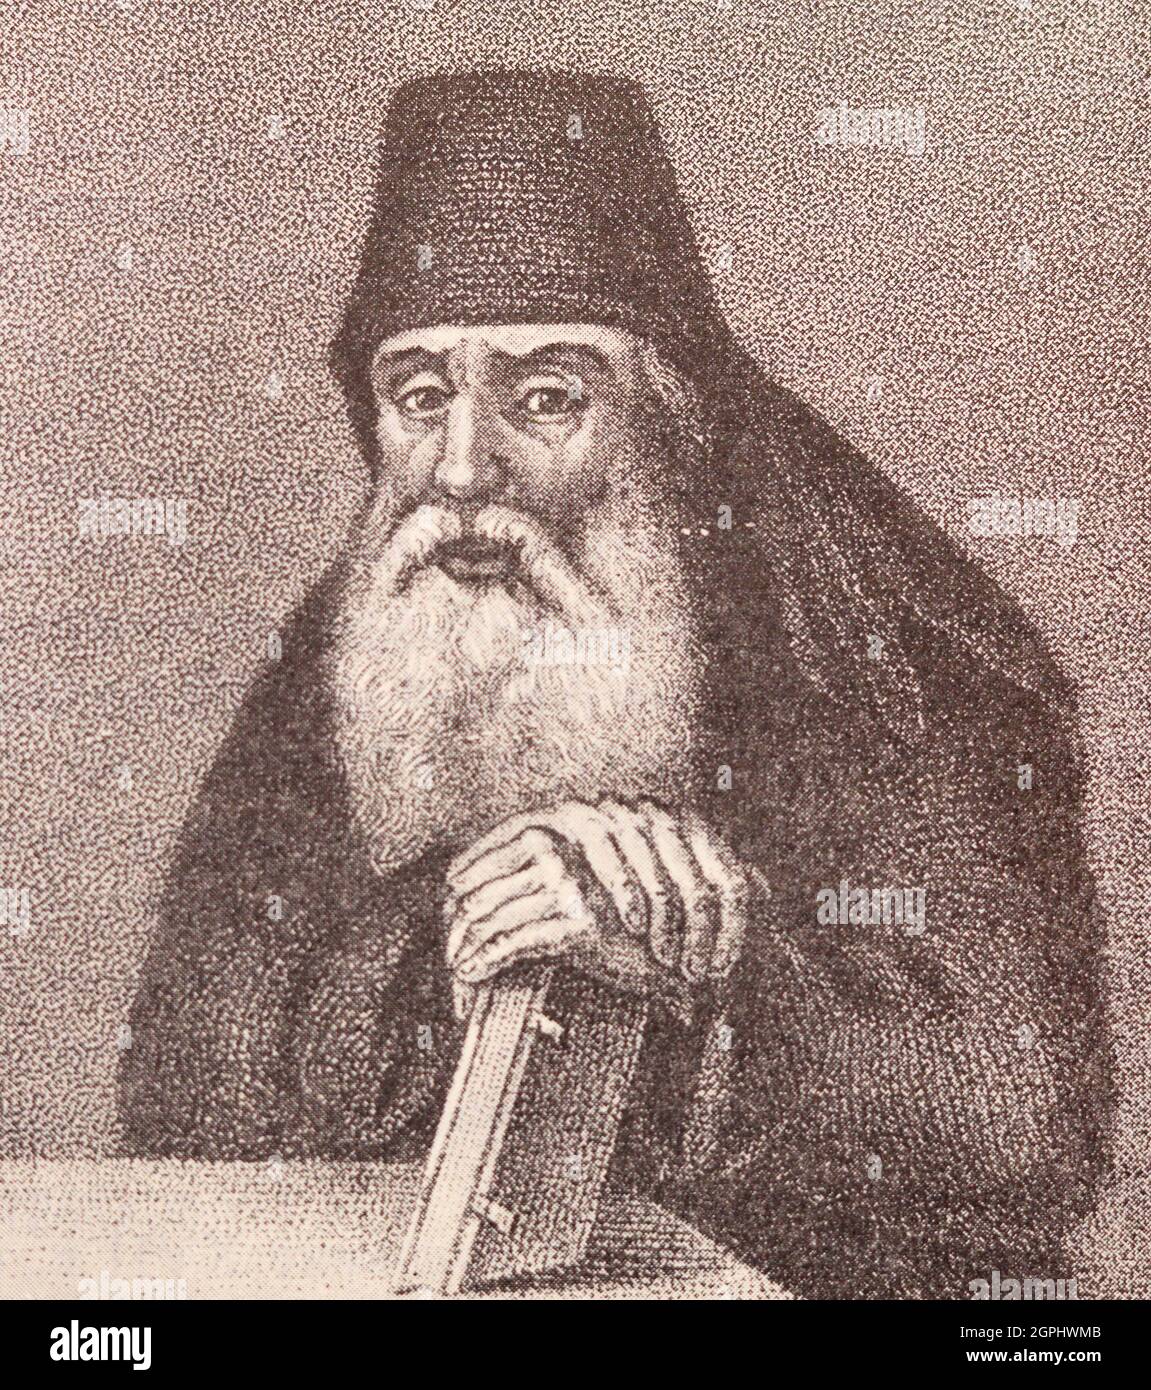 Symeon (Simeon) of Polotsk or Symeon Polotsky (1629-1680) was an academically-trained Baroque poet, dramatist, churchman, and enlightener of Belarussian descent who came from the Polish-Lithuanian Commonwealth to the Tsardom of Russia. Stock Photo